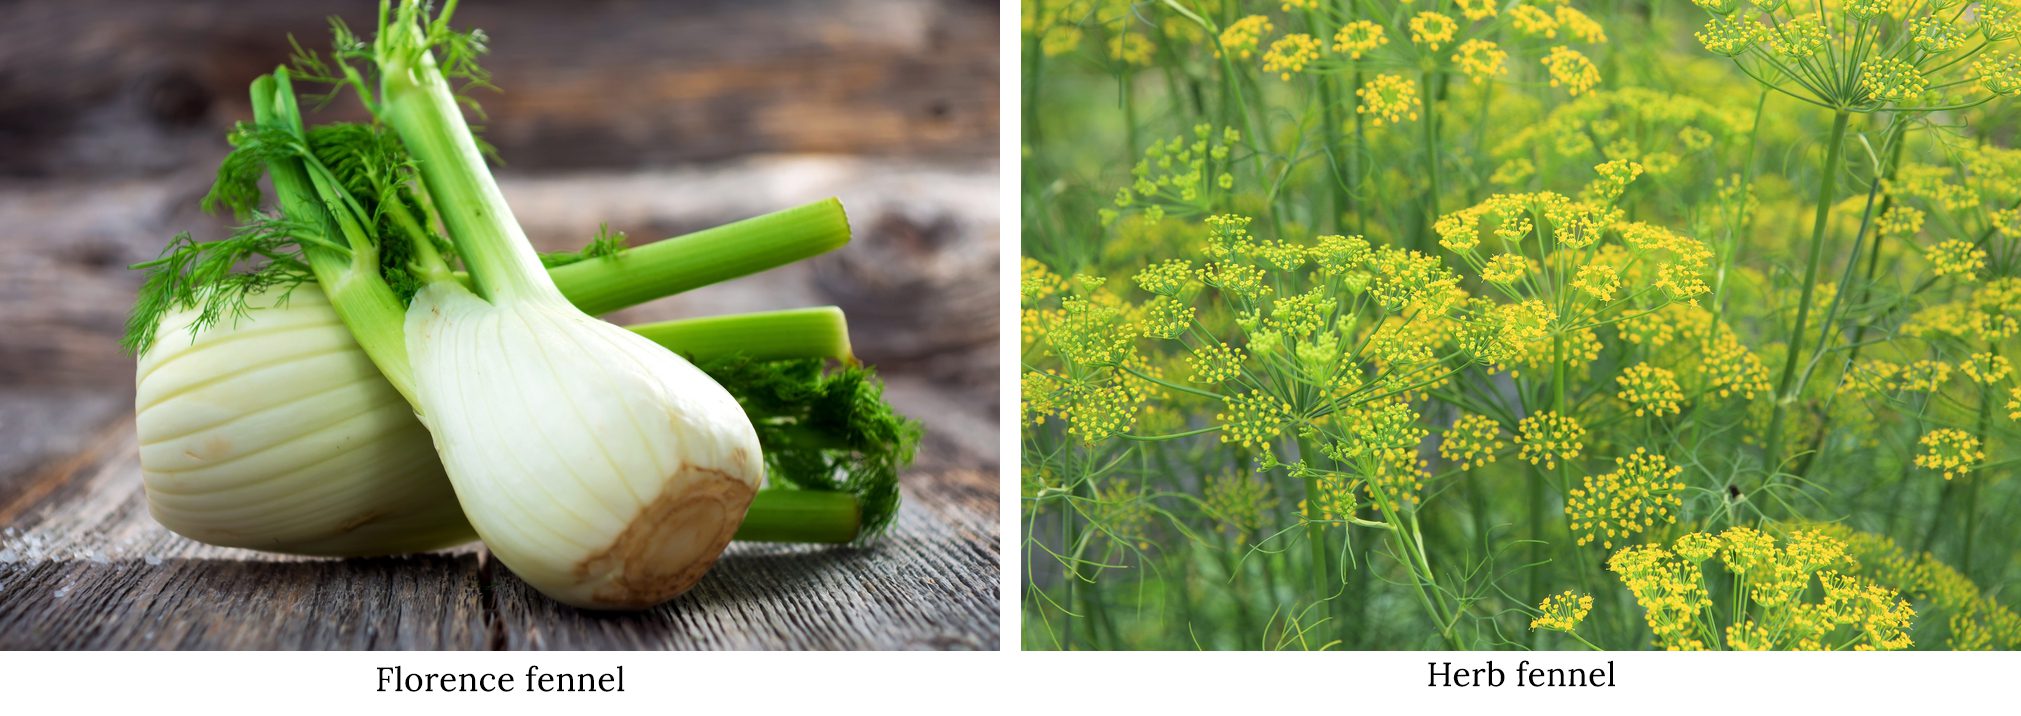 Florence fennel vs herb fennel